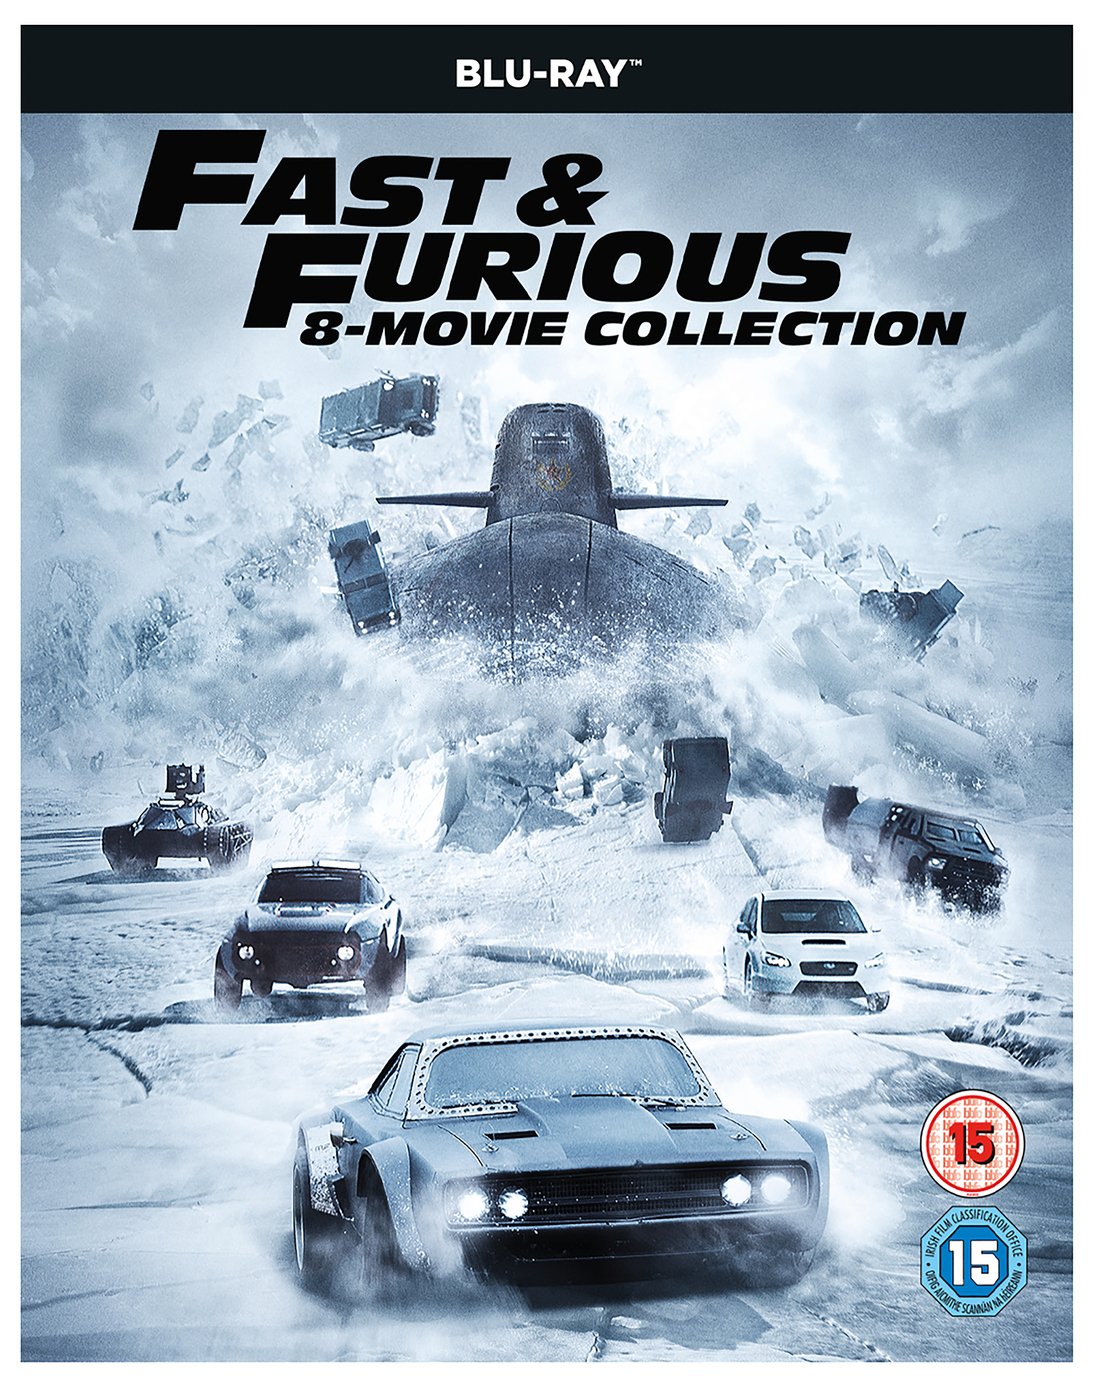 Fast & Furious 8 Movie Collection Blu-ray Box Set Review